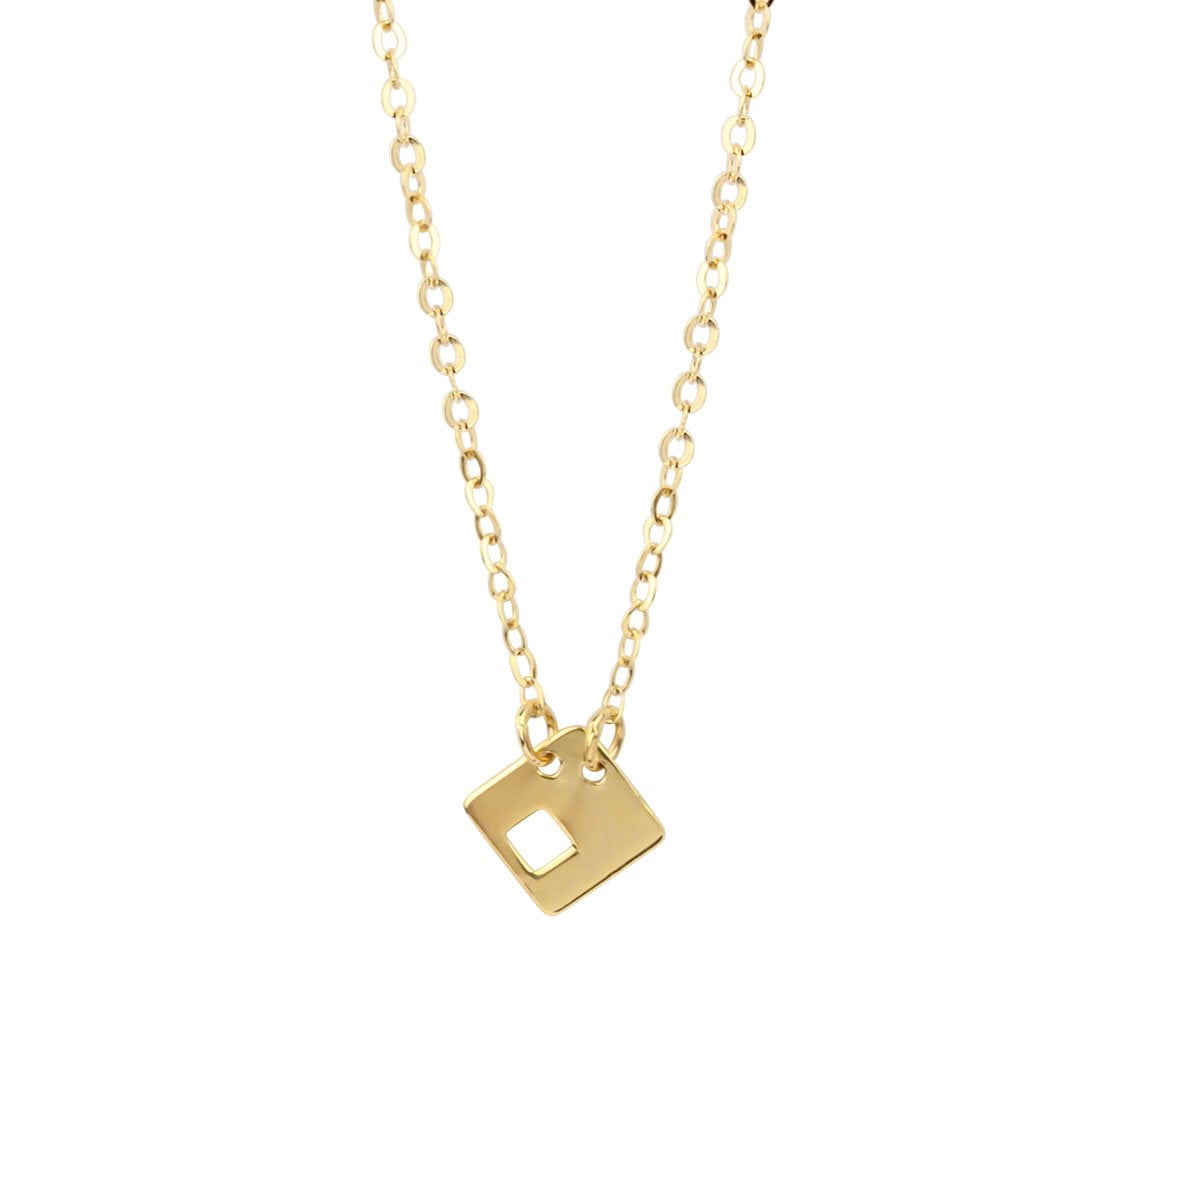 18ct Yellow Gold Square Pendant Necklace